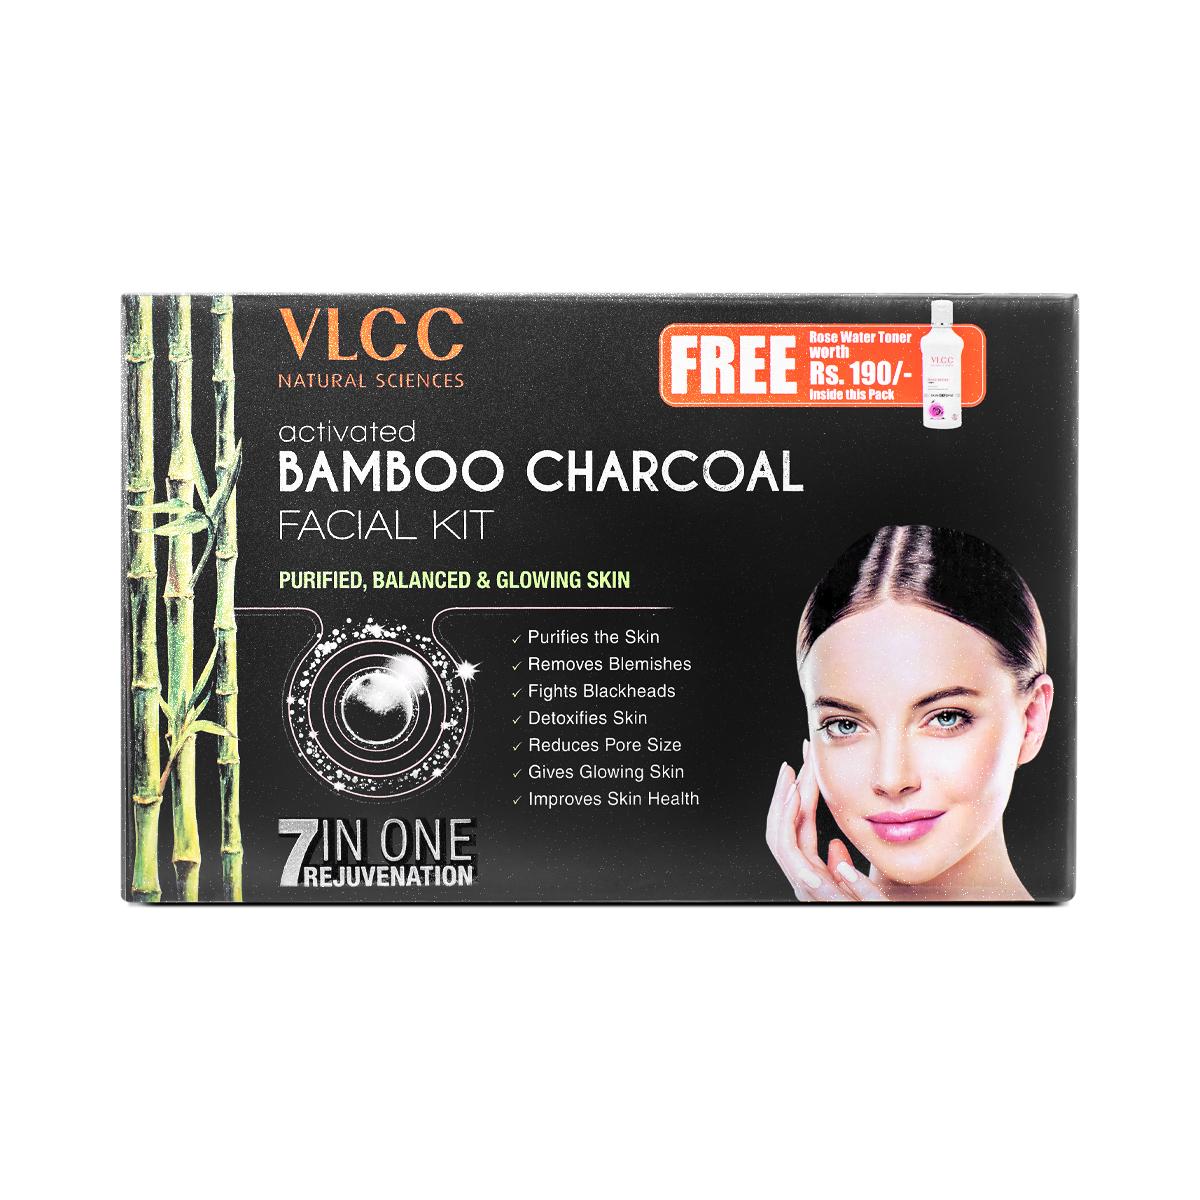 VLCC Activated Bamboo Charcoal Facial Kit + FREE Rose Water Toner - Unveil a Naturally Glowing Complexion